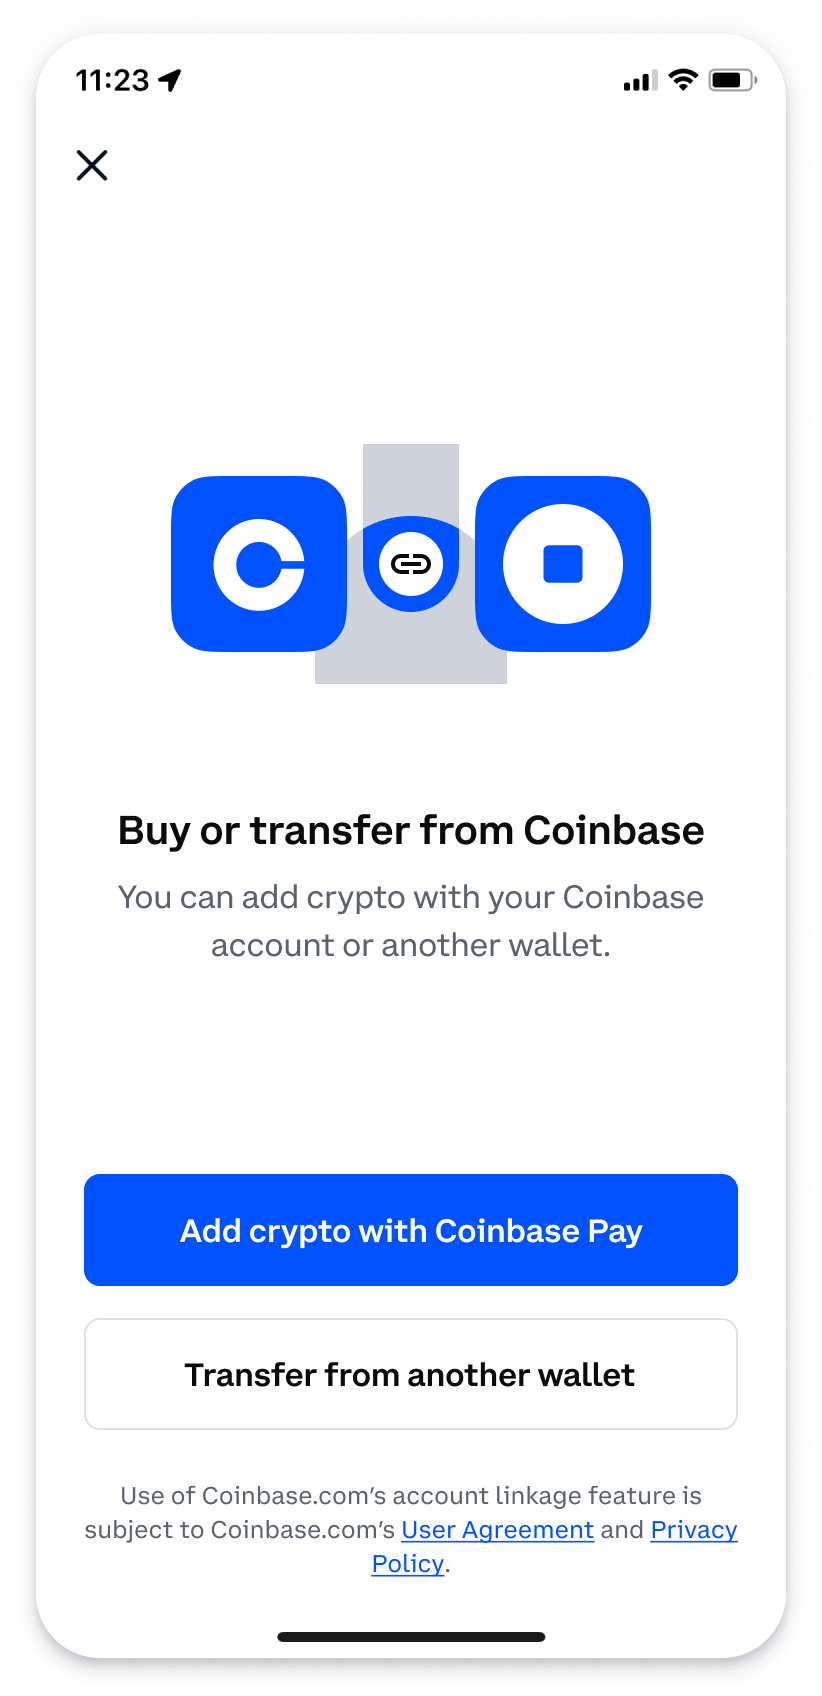 Start the process of using the assets and payment methods in your Coinbase account on dapps and any self-custody wallet.